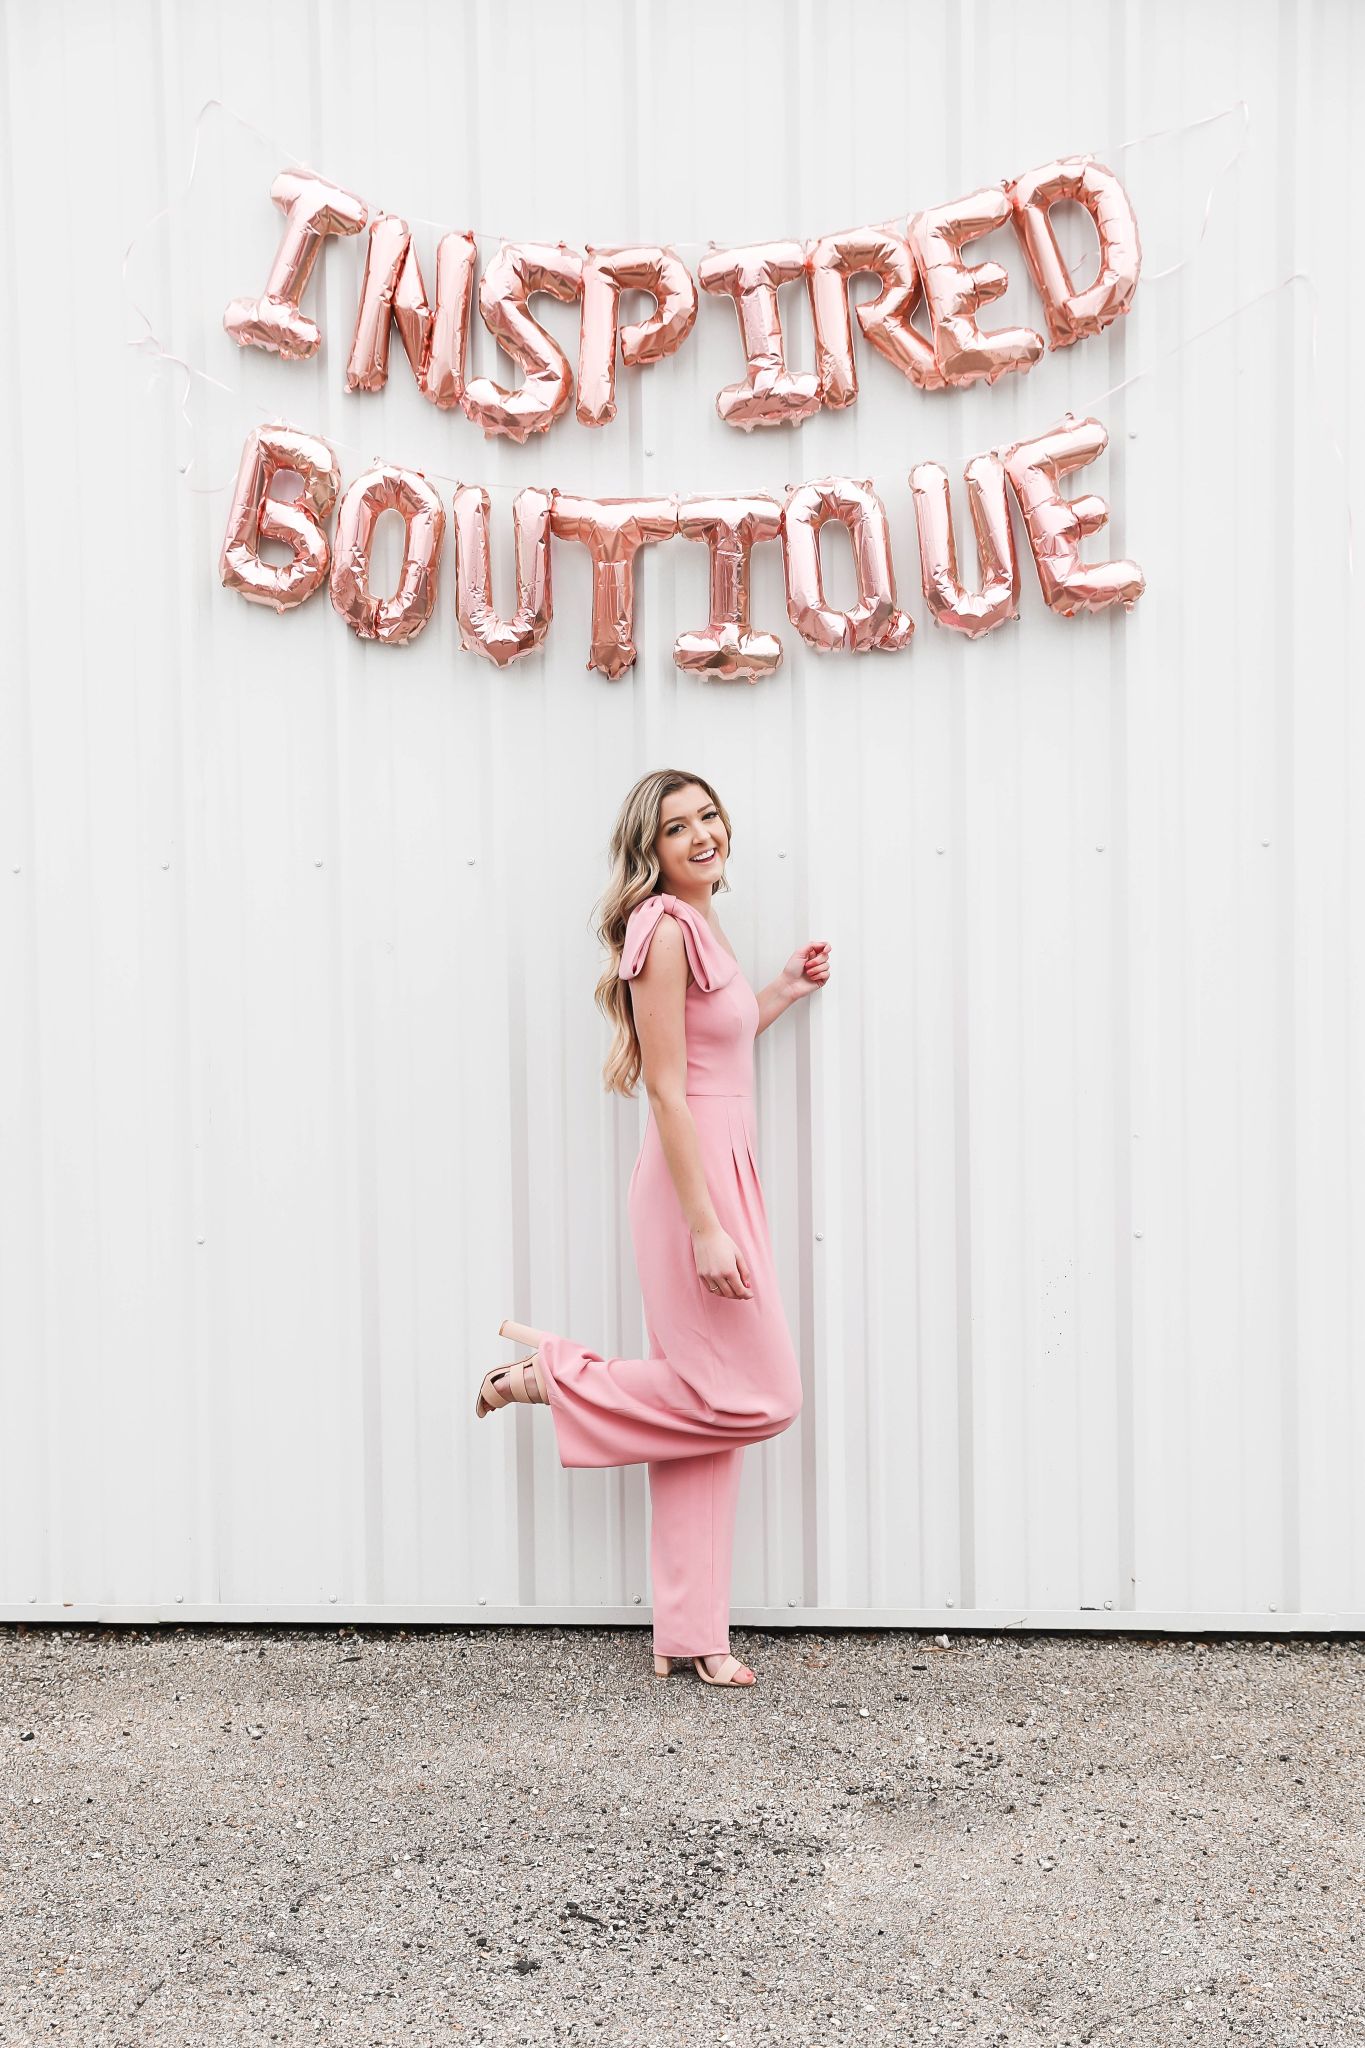 Inspired boutique daily dose of charm lauren lindmark name reveal balloons photoshoot new store ecommerce